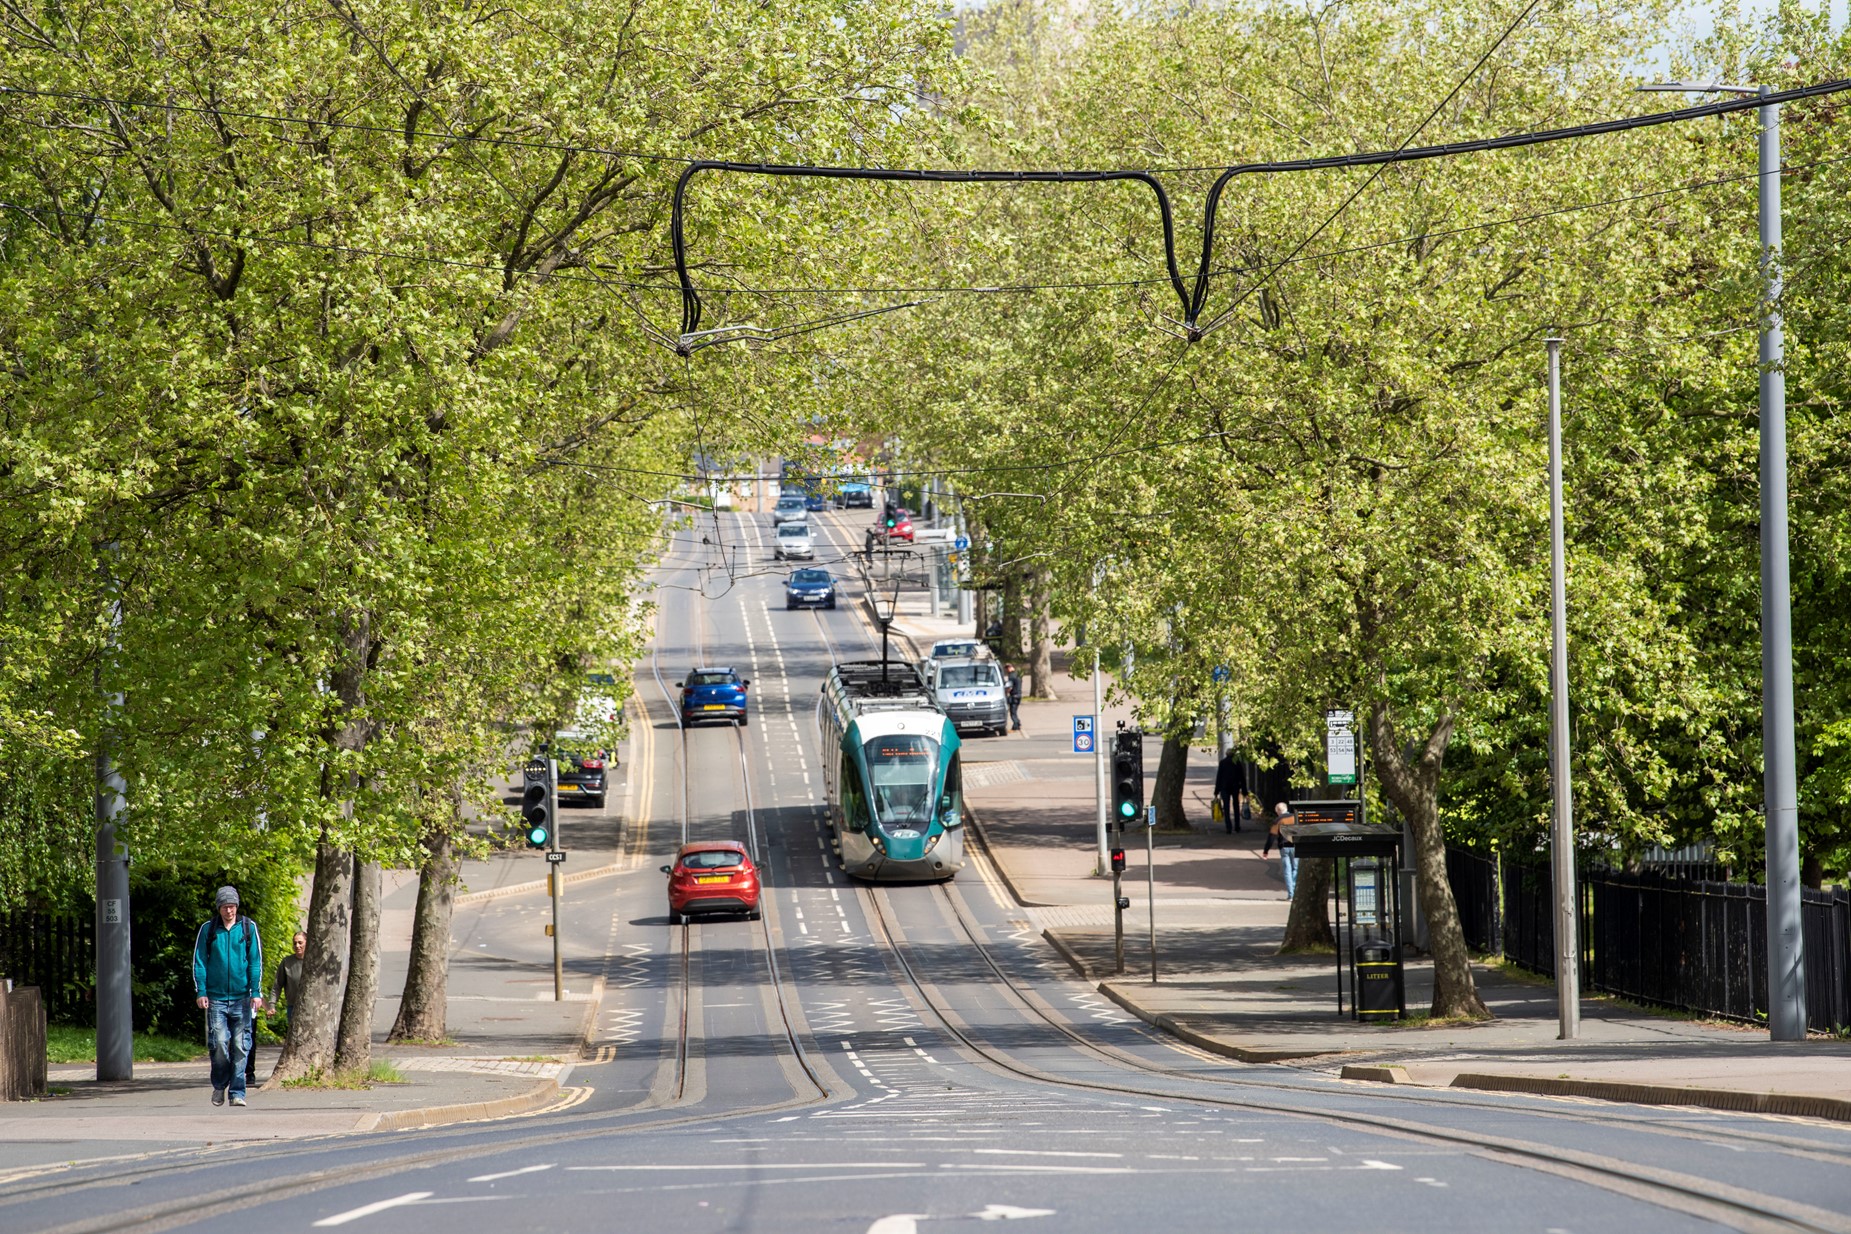 A road lined with trees, few cars and a tram